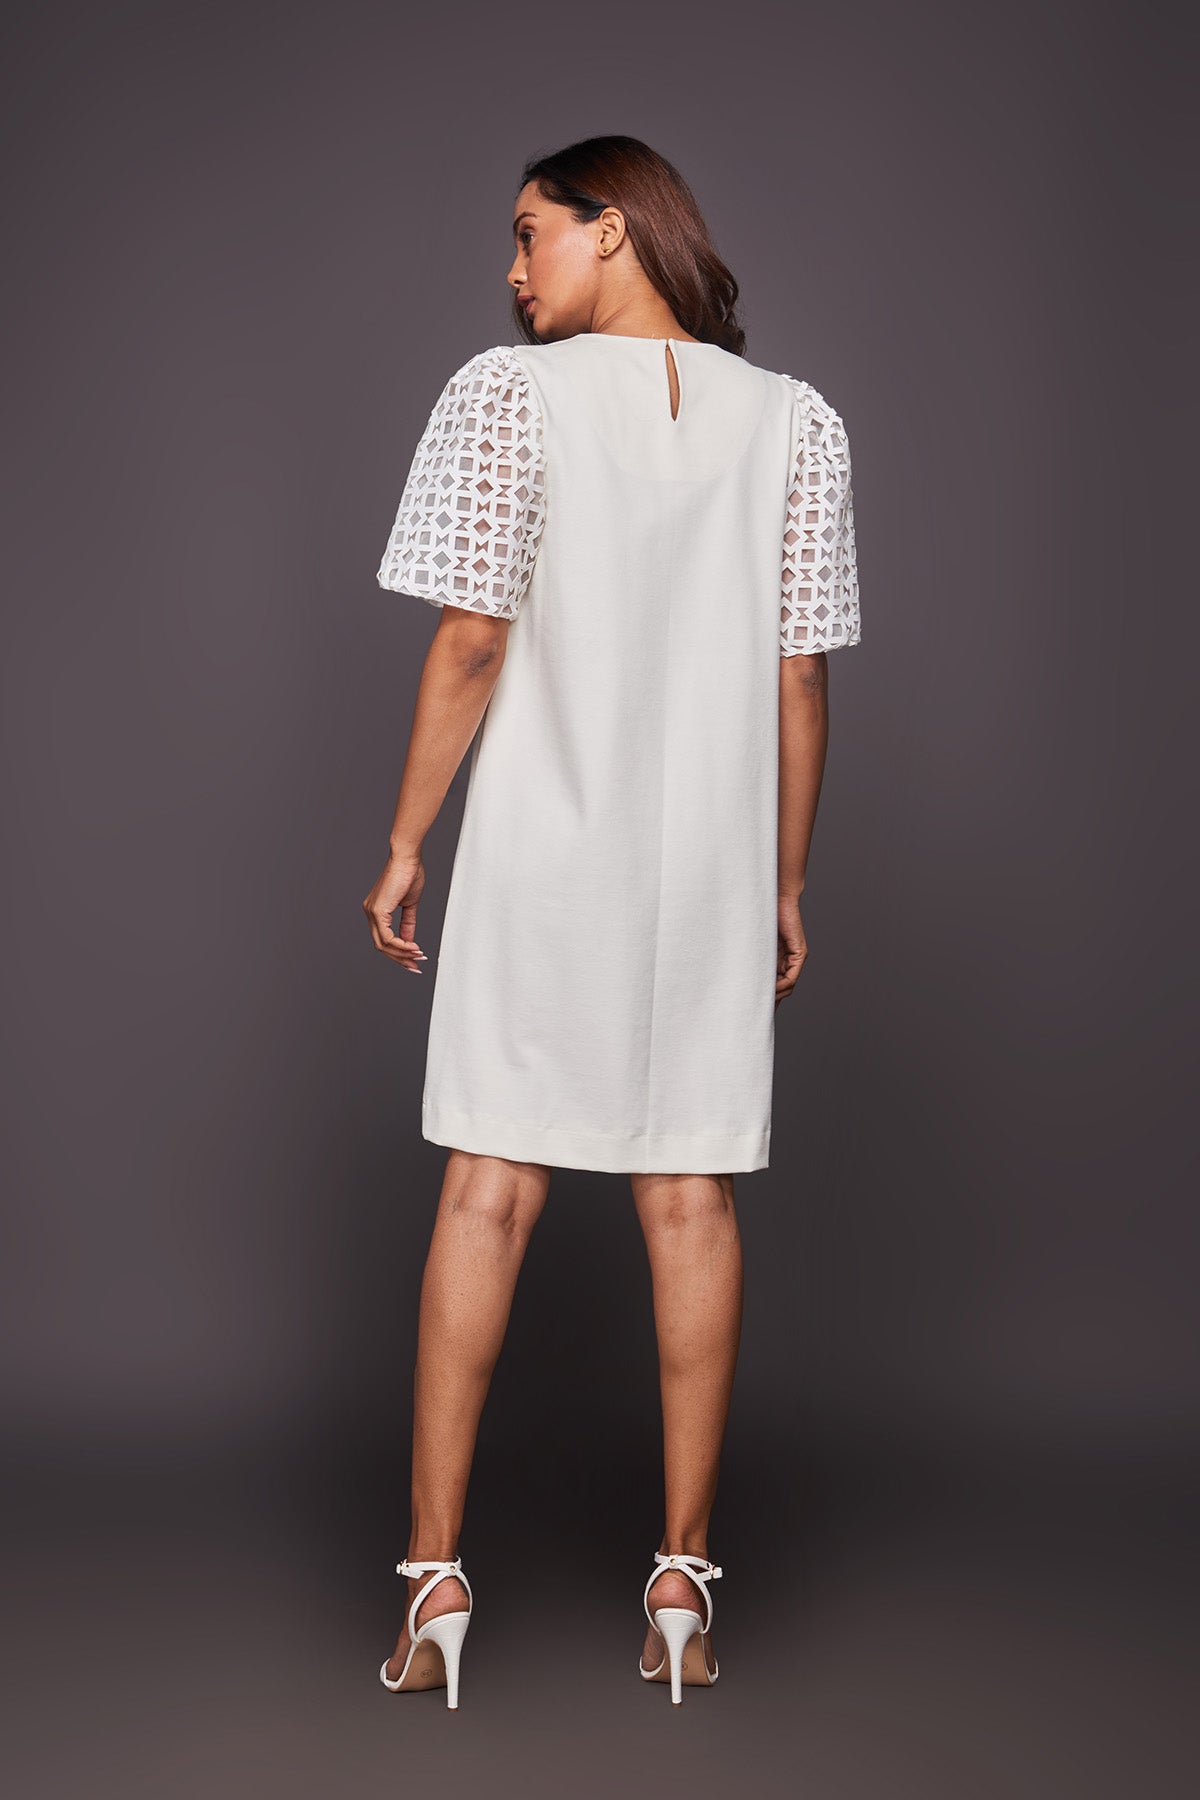 White Shift Dress With Cutwork